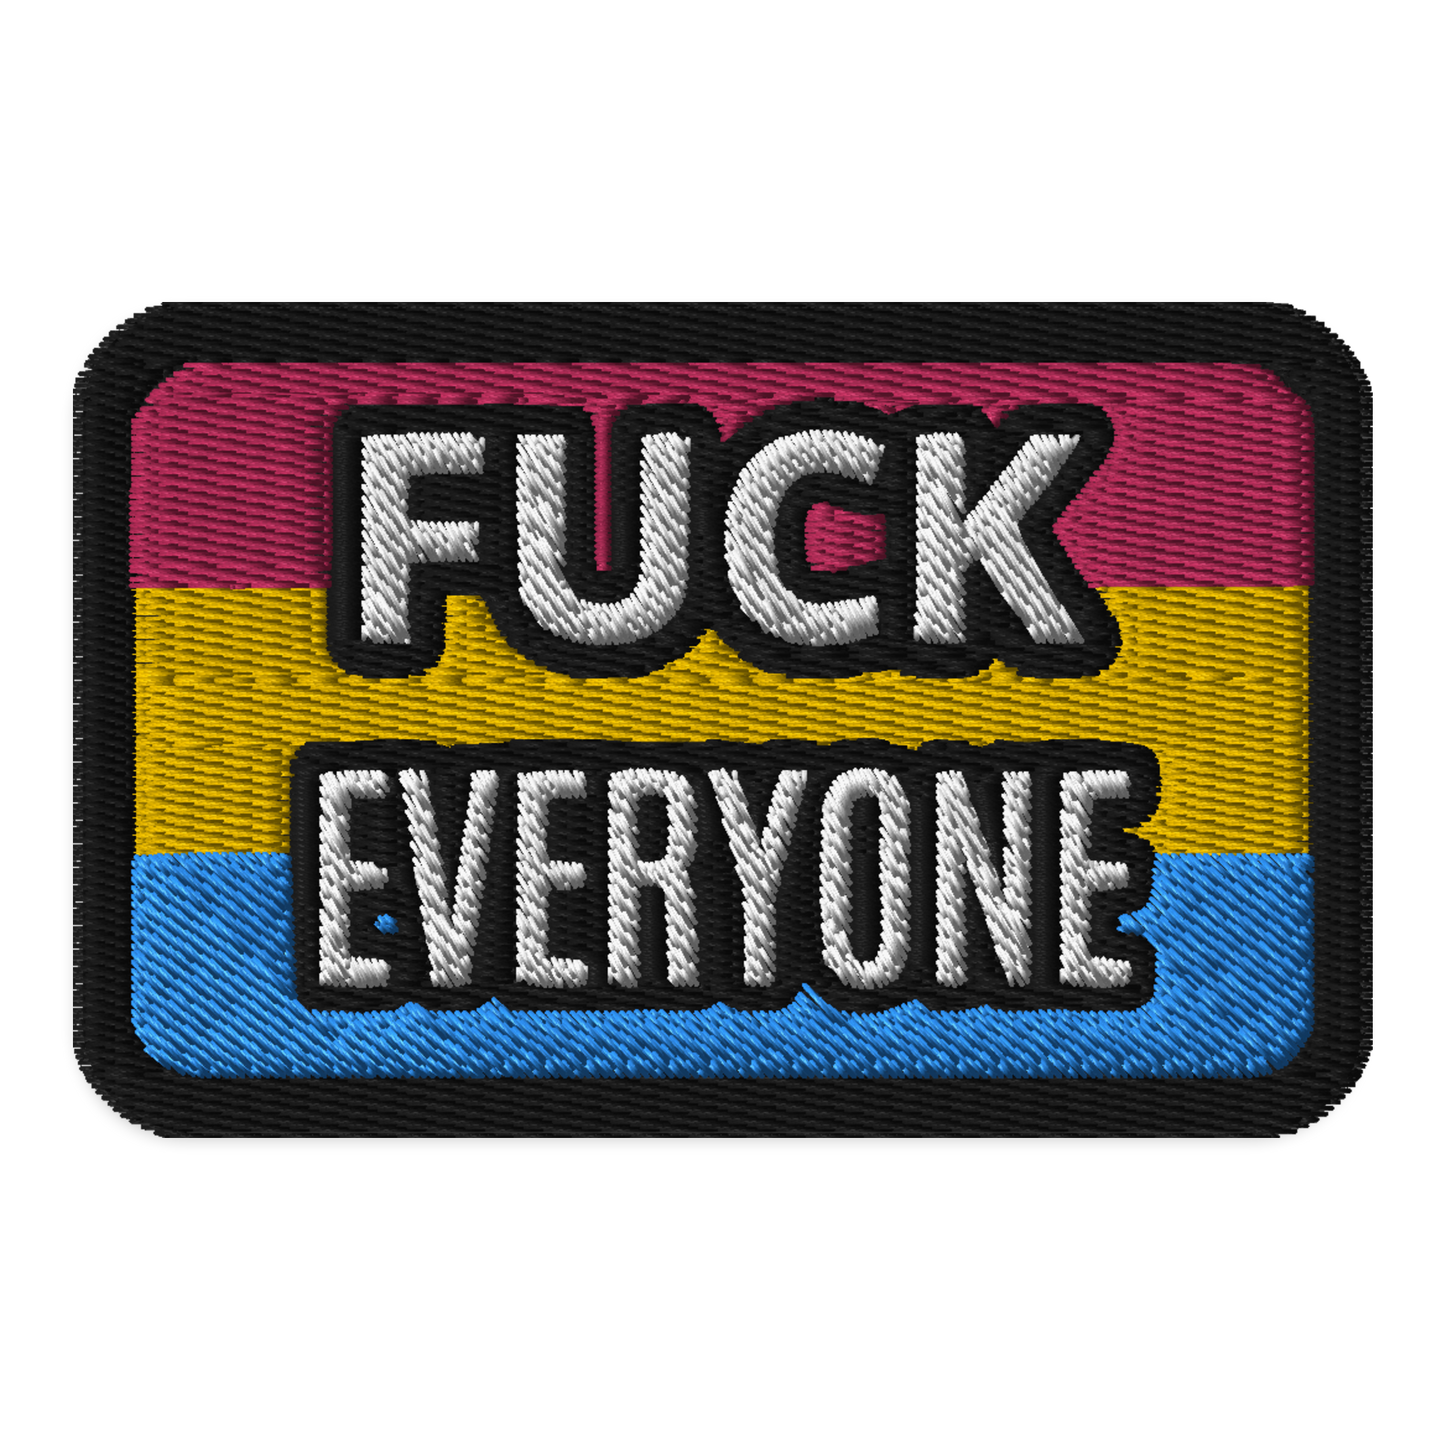 Meme Patches: I Will